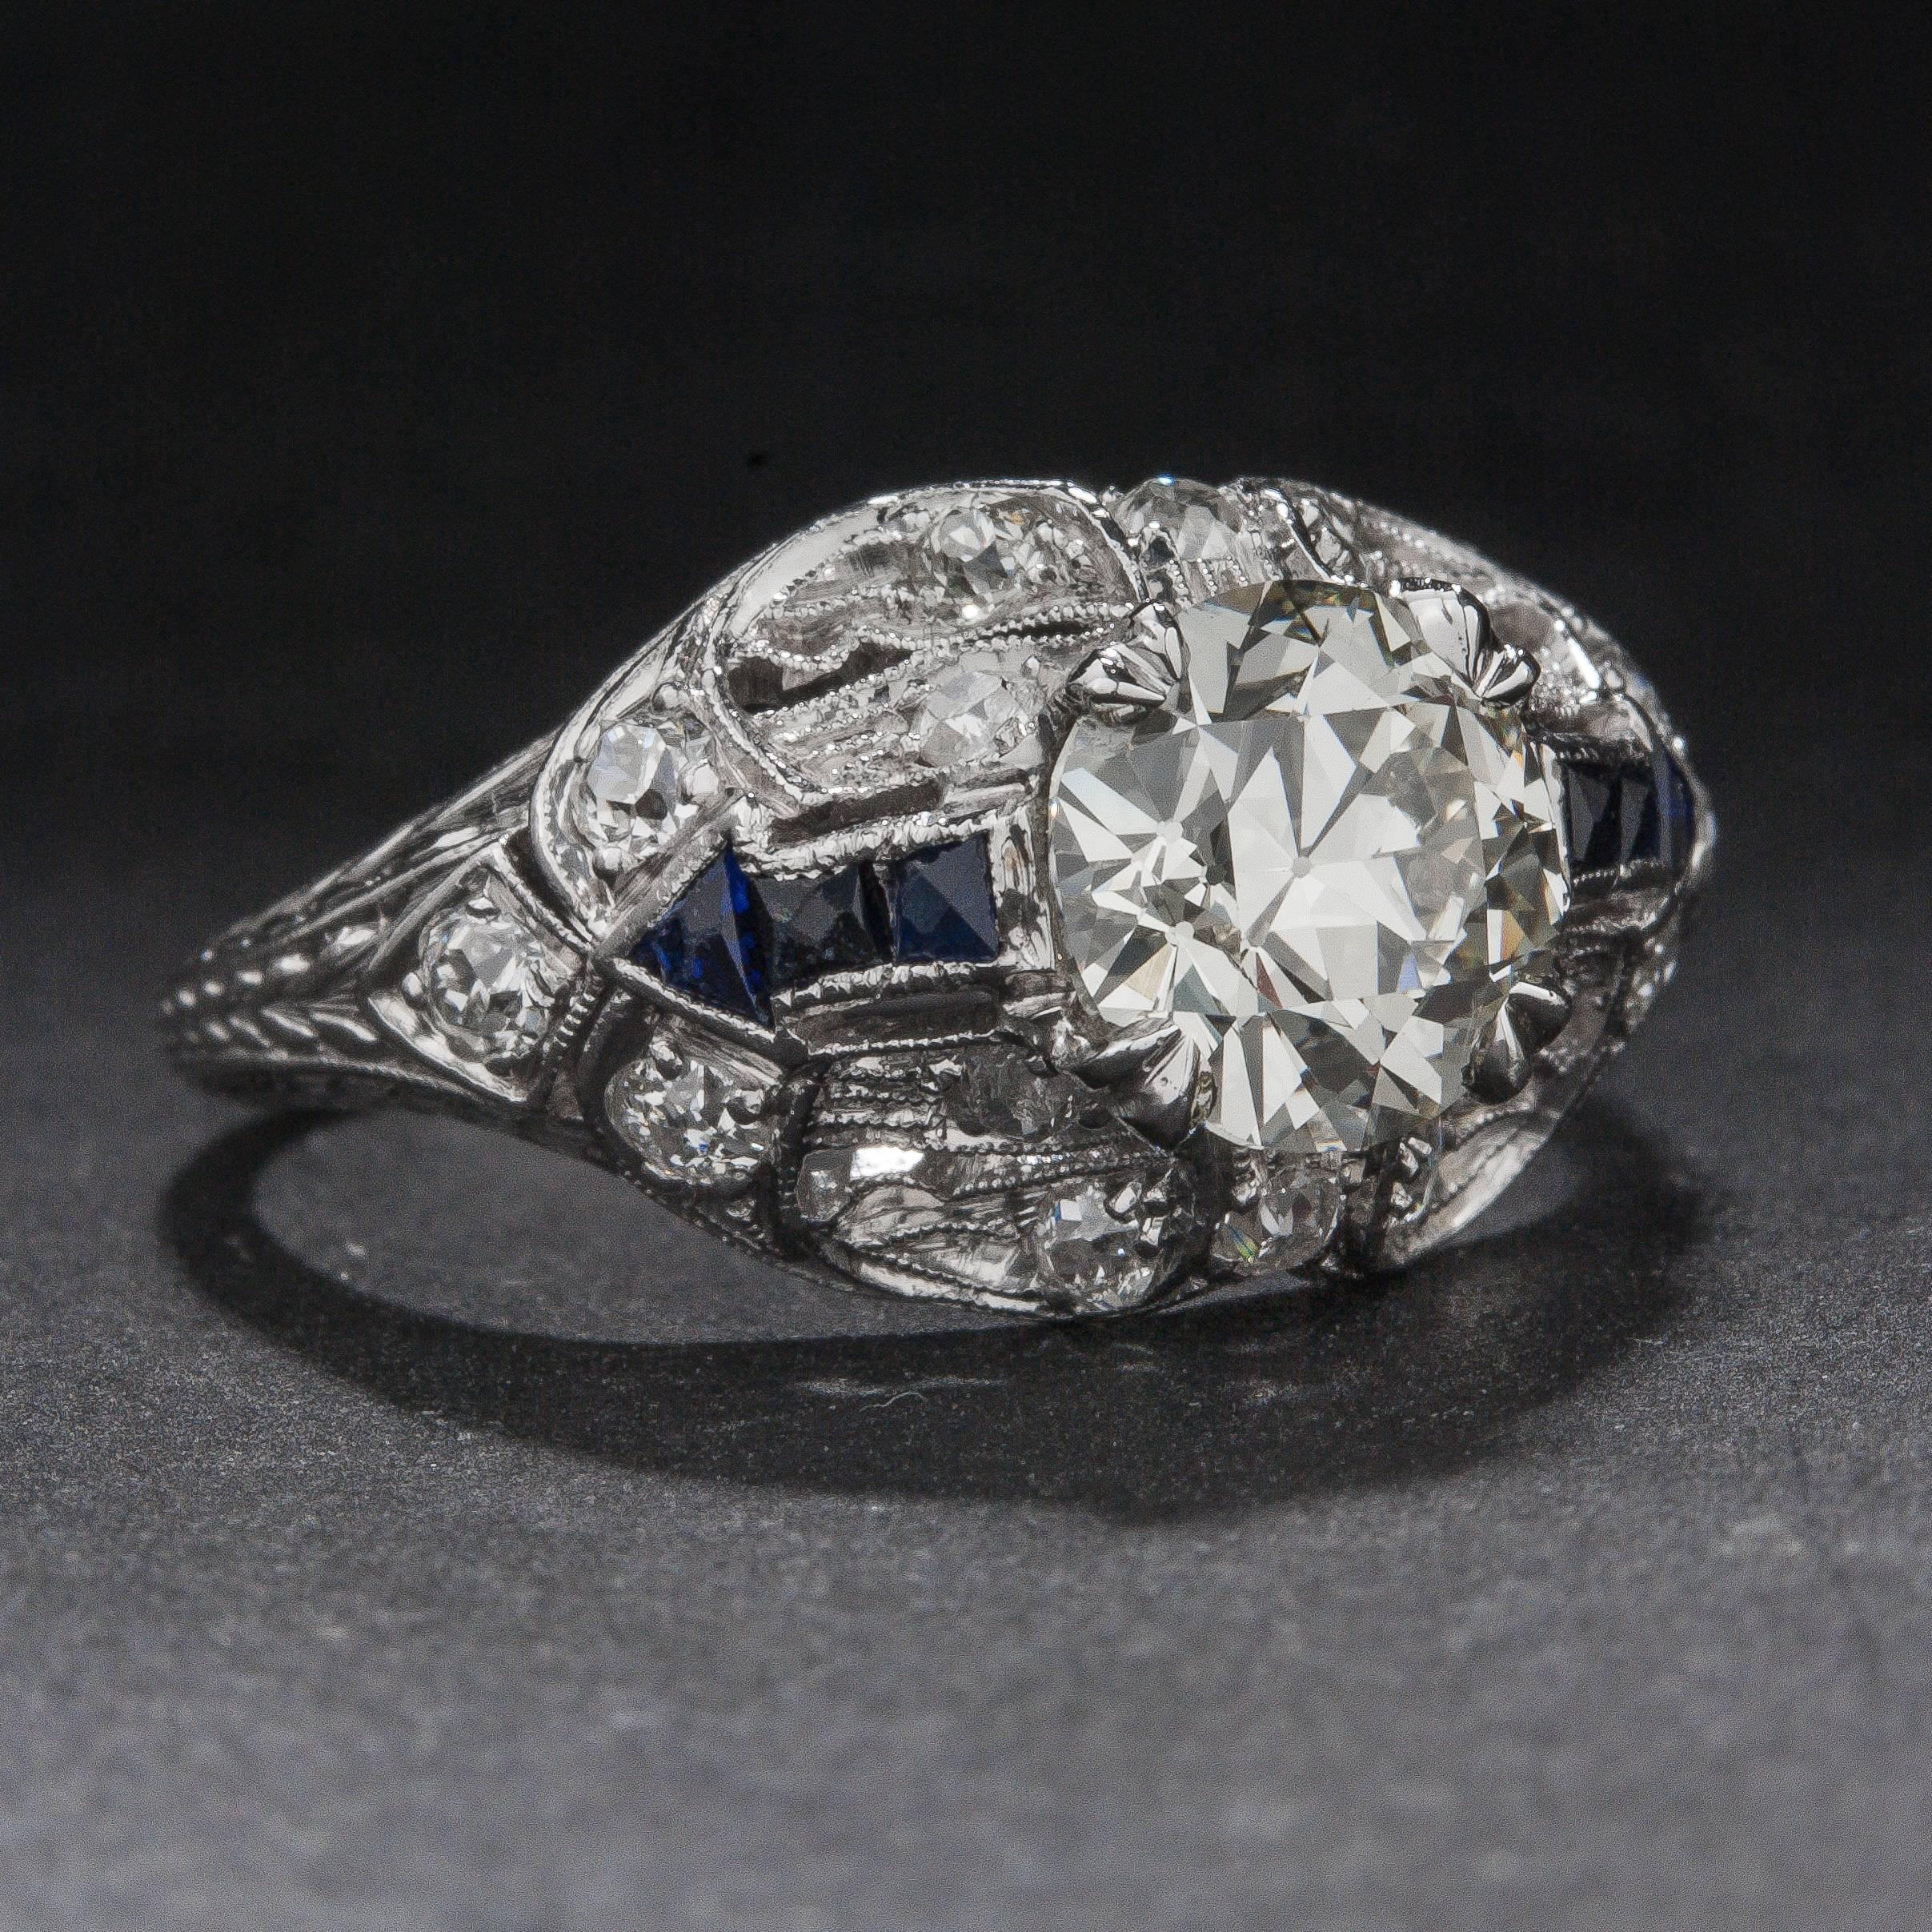 Art Deco 1.38ct Diamond and Sapphire Ring In Excellent Condition For Sale In Carmel, CA